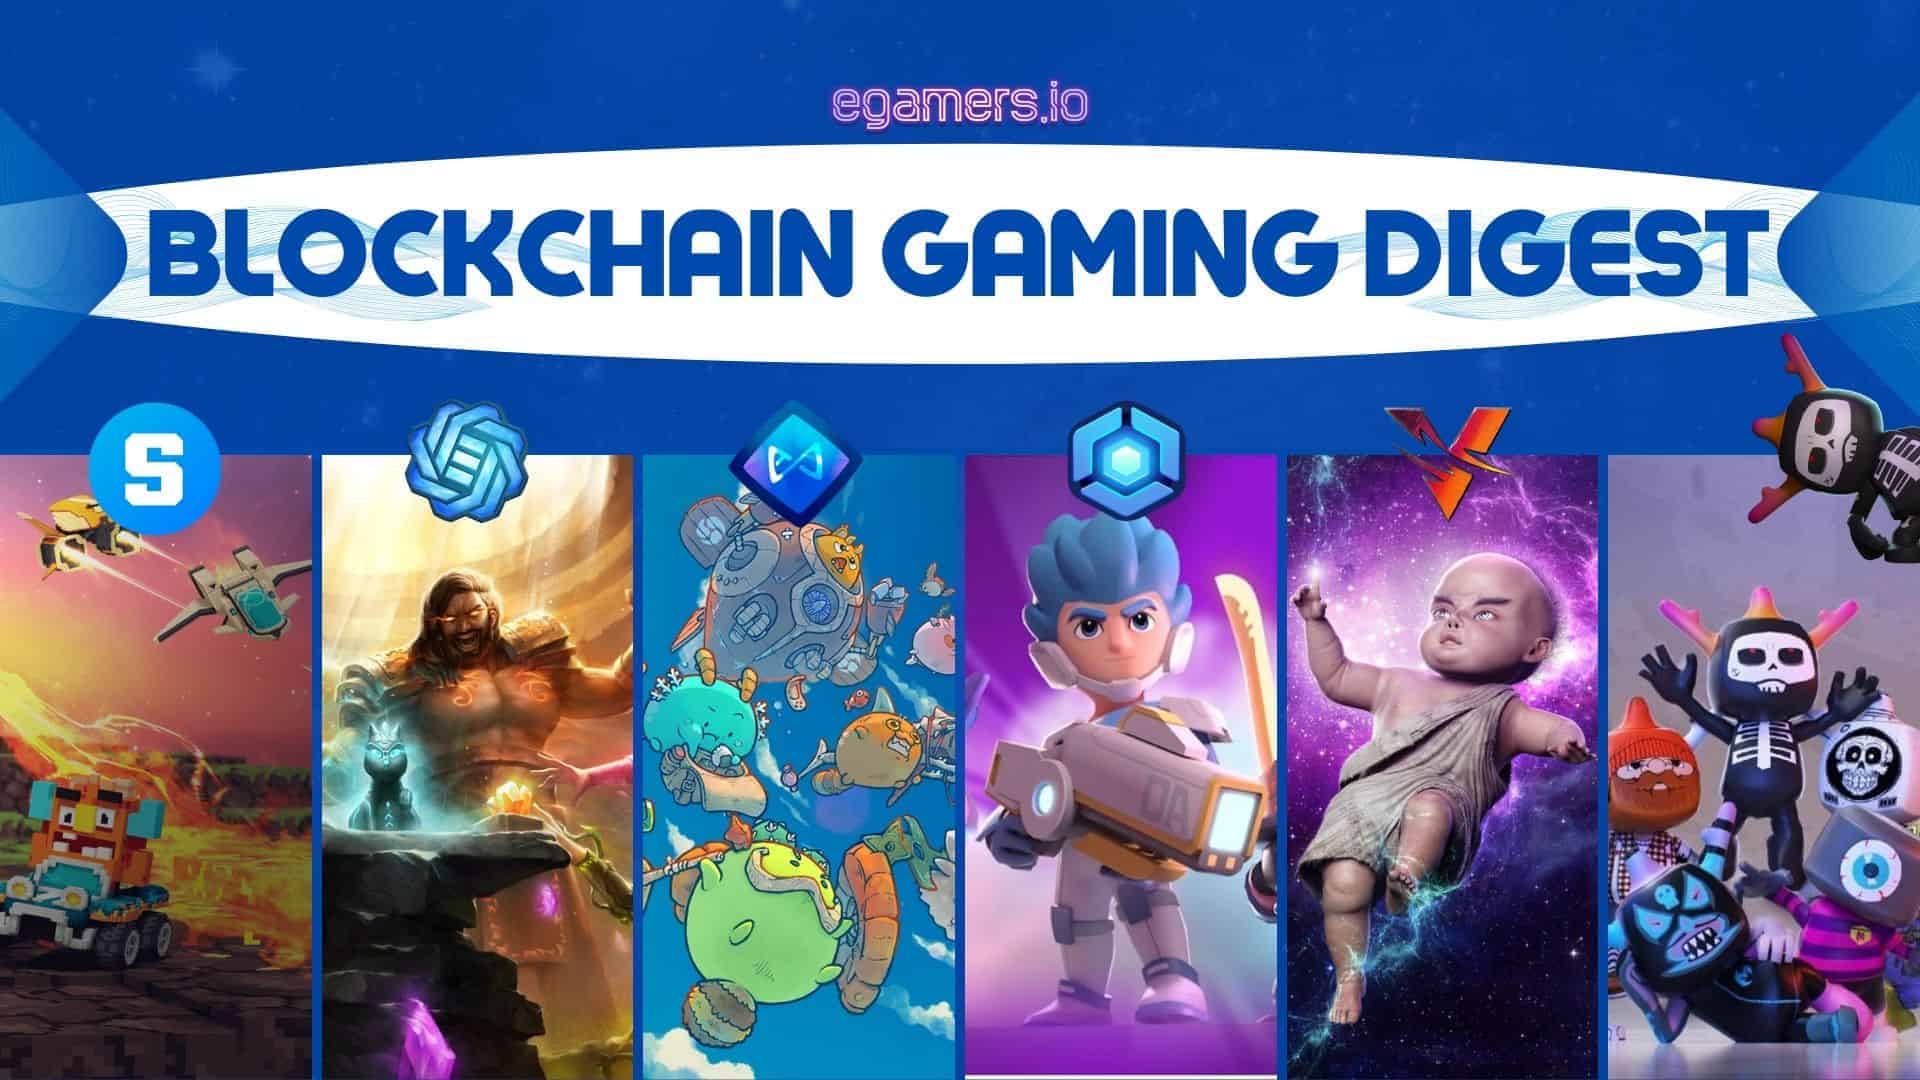 BLOCKCHAIN GAMING DIGEST new Containment Corps, the Multiverse tower defense game is hosting their presale which you can participate right away and of course, play for free on the Steam Platform. The game combines first-person action with co-operative strategy and tower defense elements.